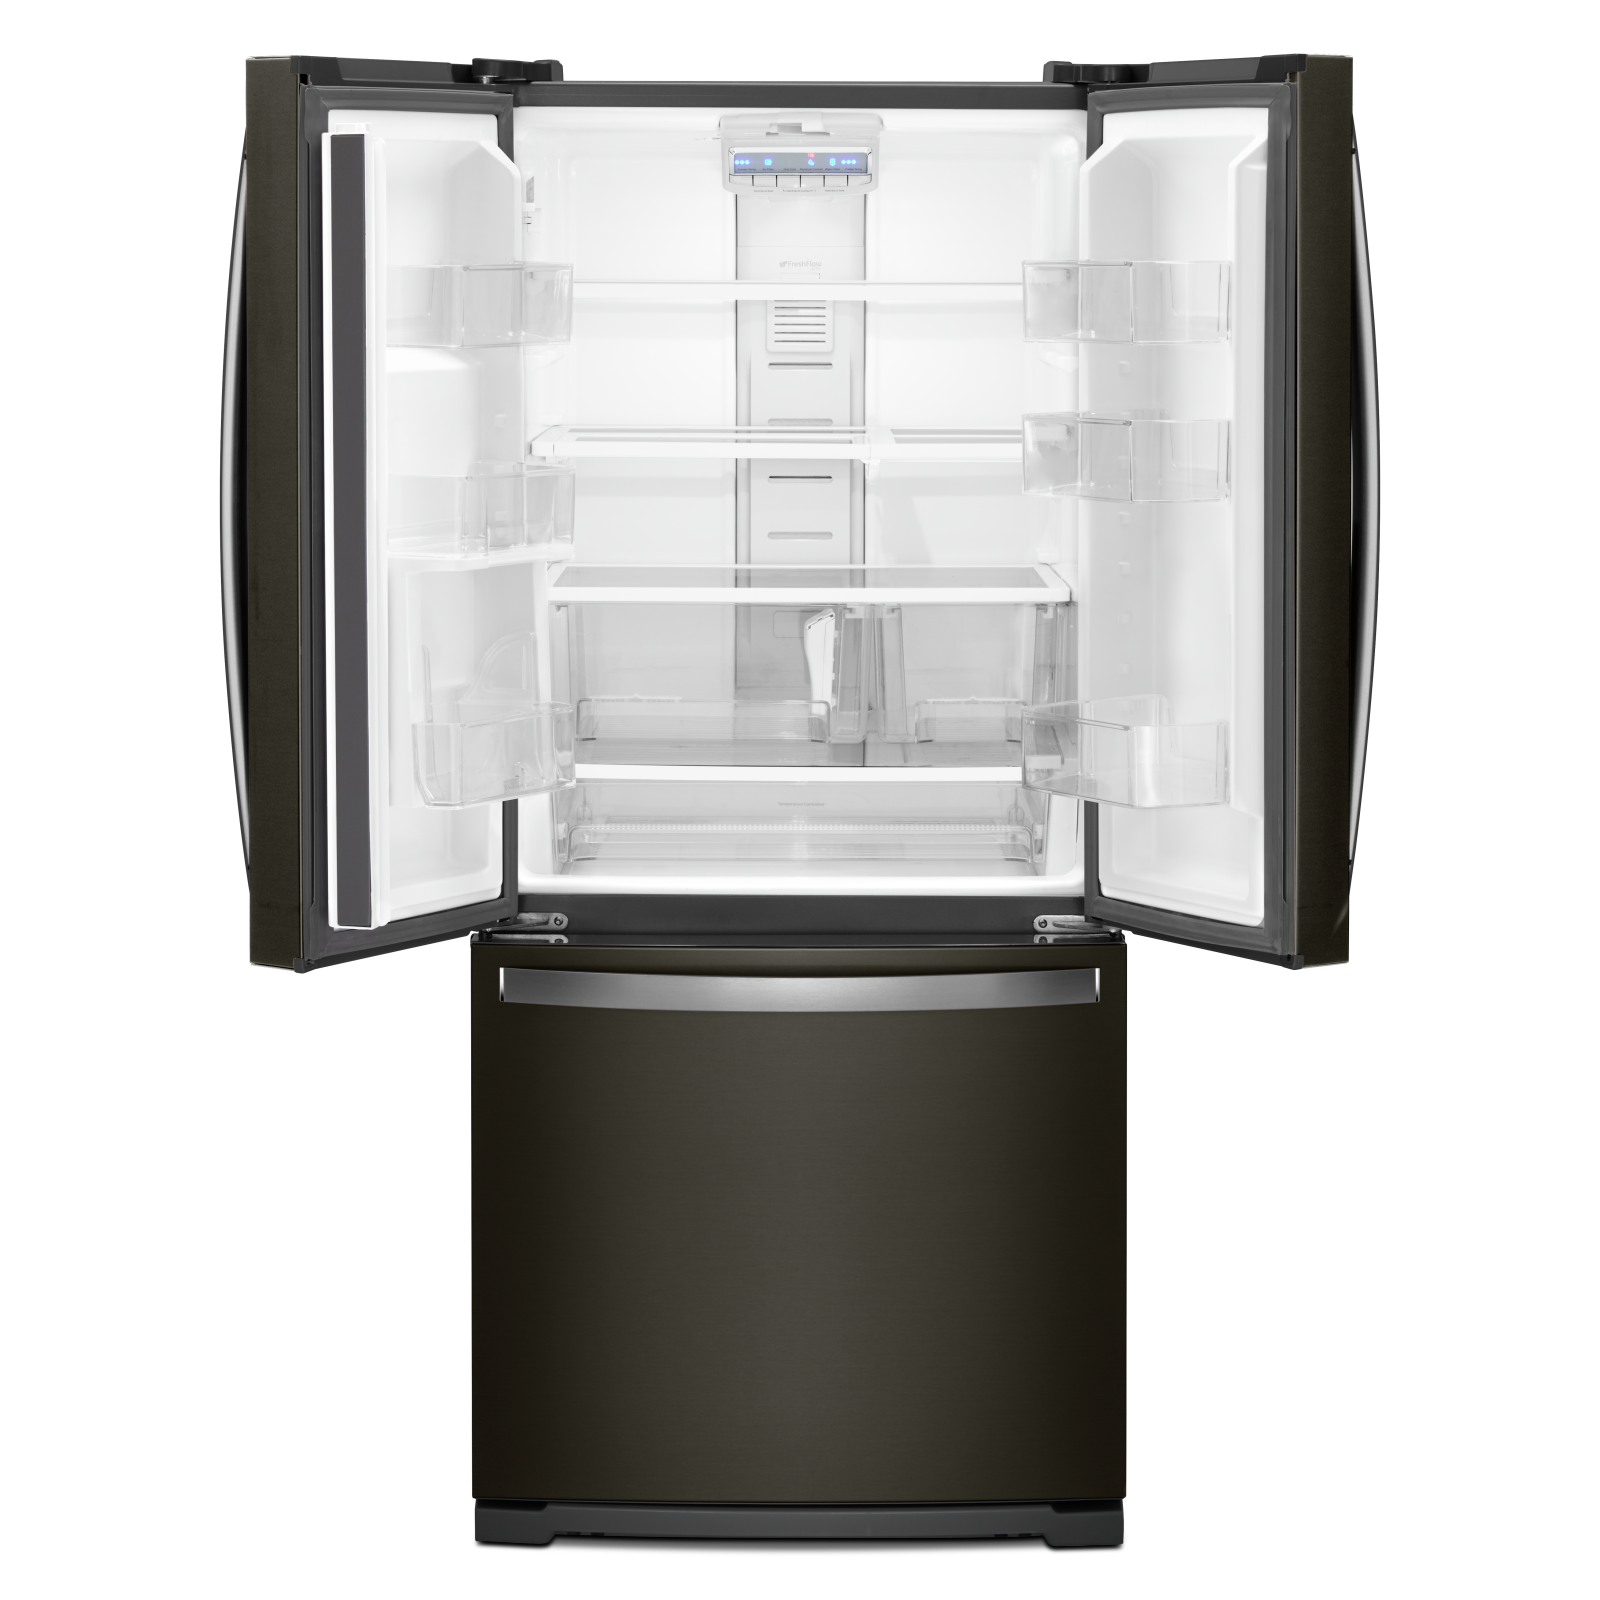 Whirlpool - 34.63 Inch 19.68 cu. ft French Door Refrigerator in Black Stainless - WRF560SFHV